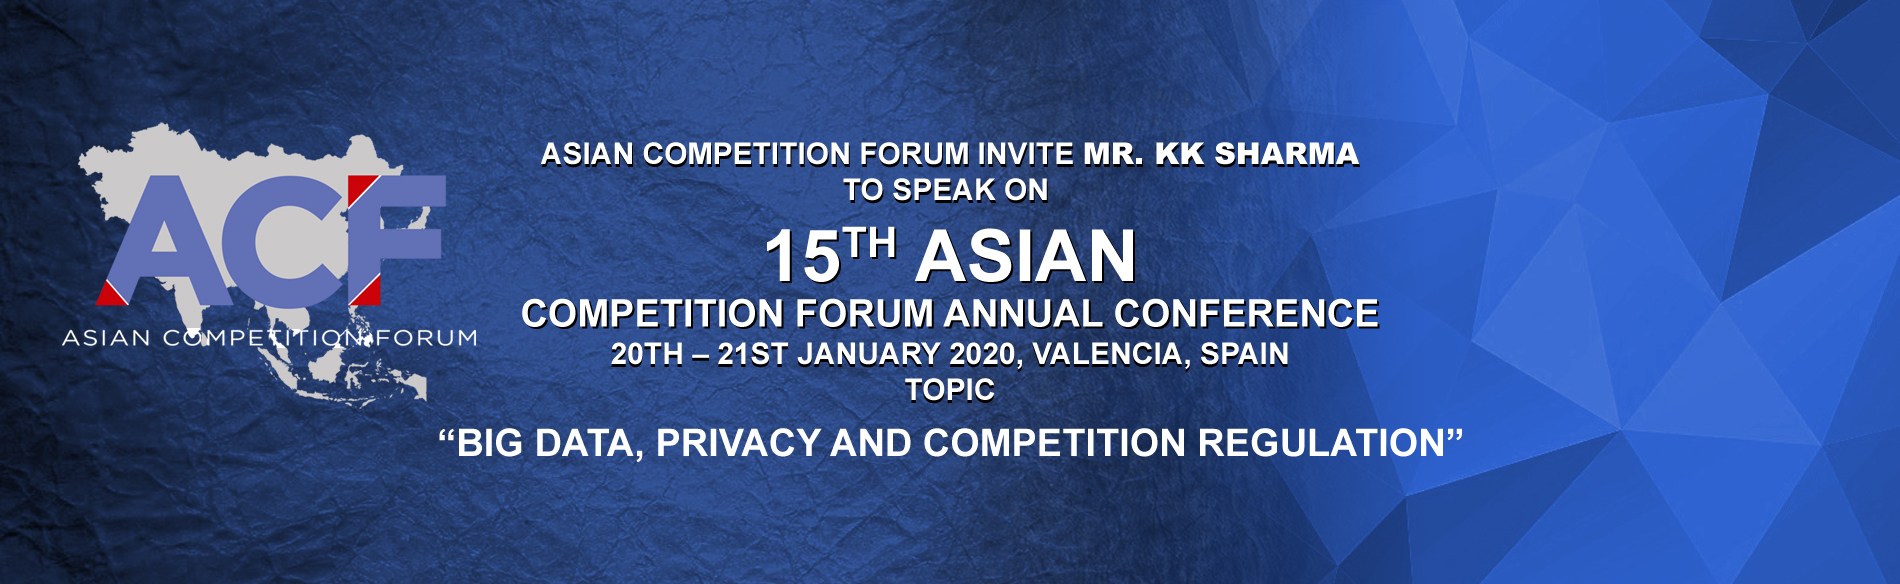 Invitation to Speak at 15th Asian Competition Forum Annual Conference: 20th – 21st January 2020, Valencia, Spain